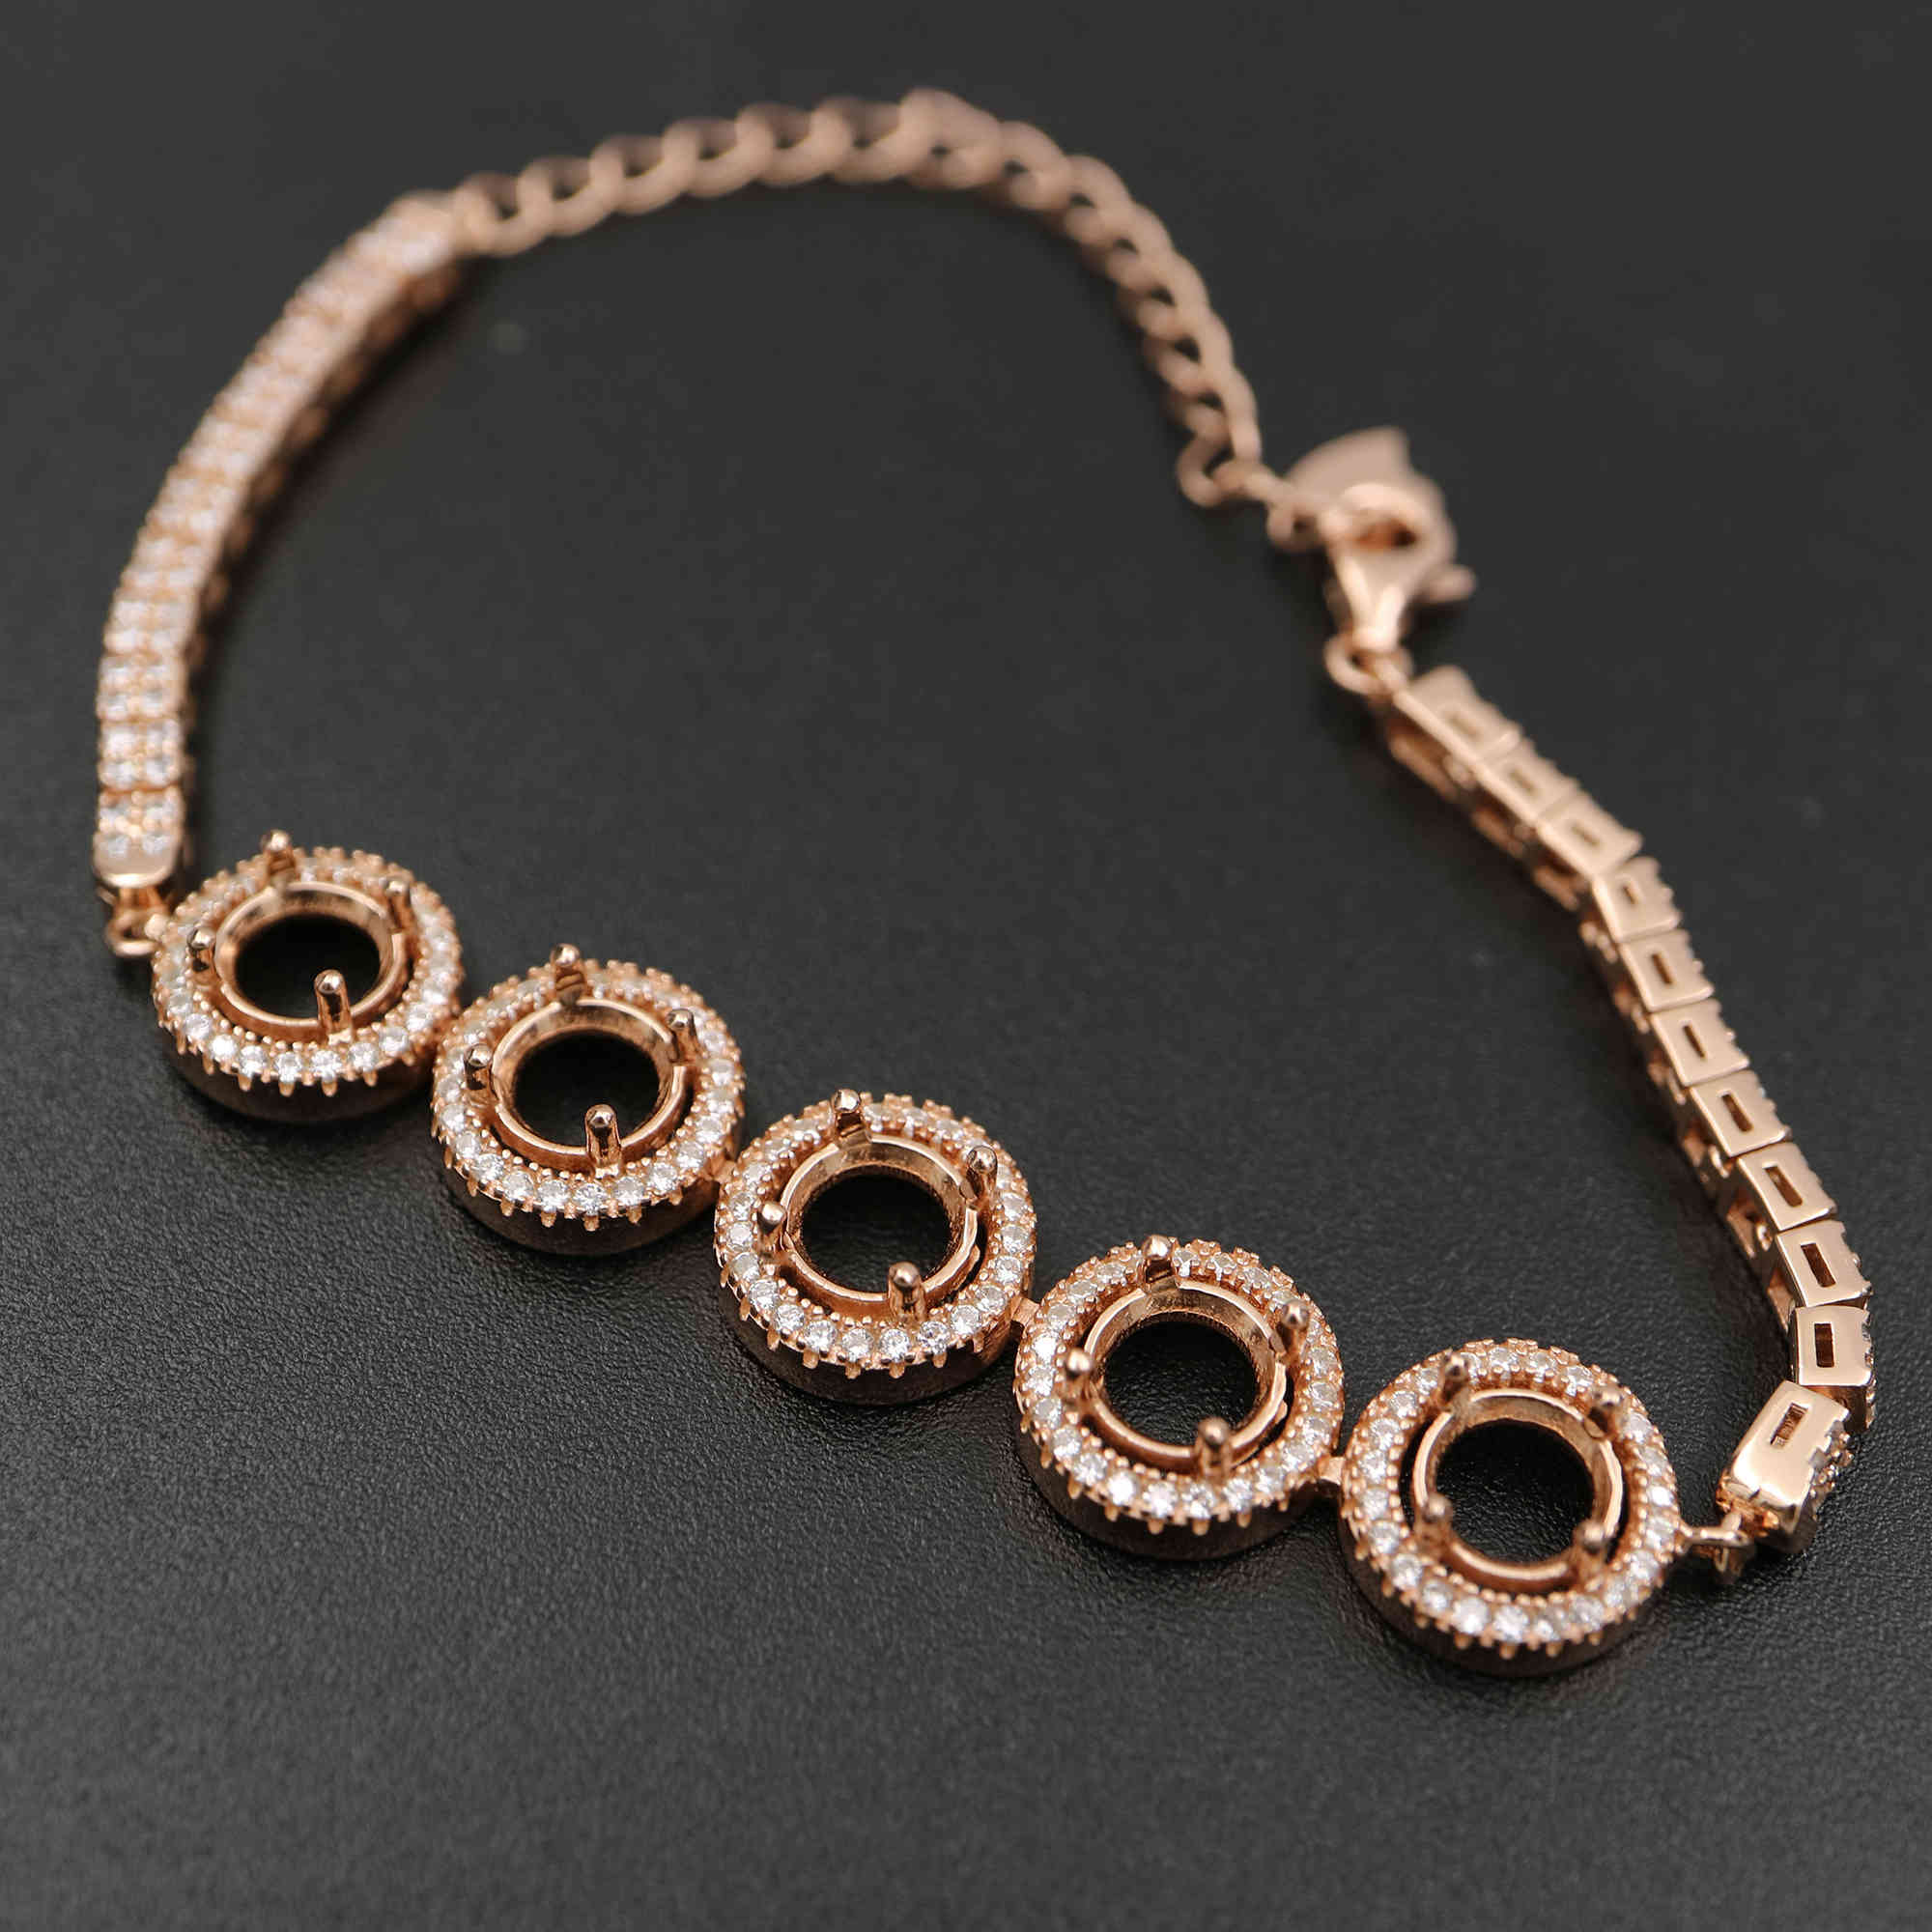 1Pcs 5-6MM Round Bezel Rose Gold Plated Solid 925 Sterling Silver 5 Stones Luxury Bracelet Settings 5.5Inches+2Inches Extension Chain 1900223 - Click Image to Close